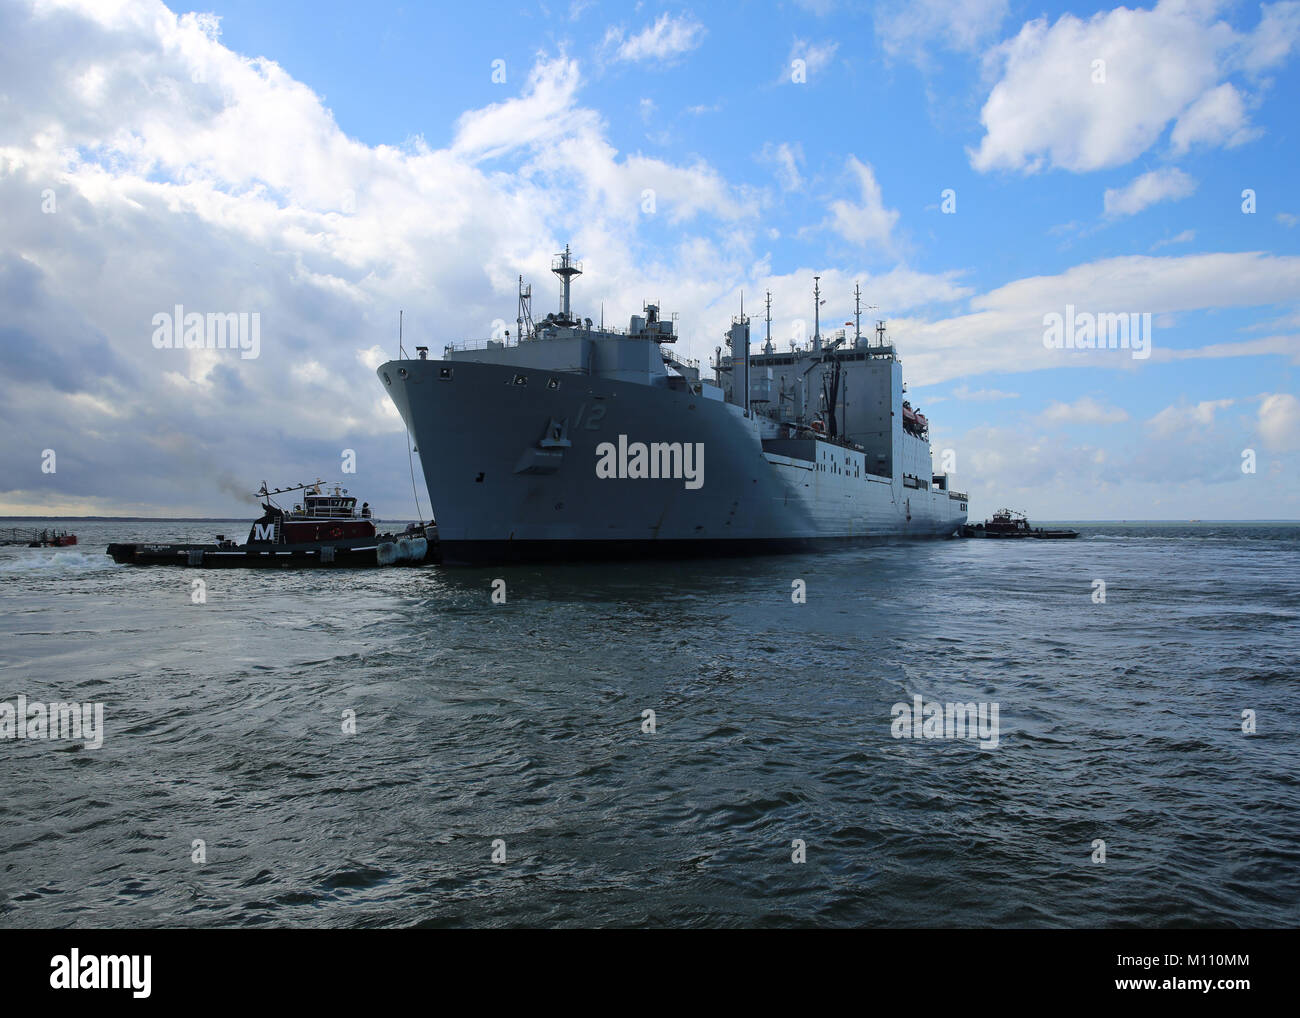 180123-N-OH262-567  NORFOLK (Jan. 23, 2018) The Military Sealift Command dry cargo and ammunition ship USNS William McLean (T-AKE 12) gets underway from Naval Station Norfolk, Jan. 23, 2018. William McLean departed from Virginia to begin its deployment in support of U.S. naval and allied forces operating in the U.S. 6th Fleet’s area of responsibility. (U.S. Navy photo by Bill Mesta/Released) Stock Photo